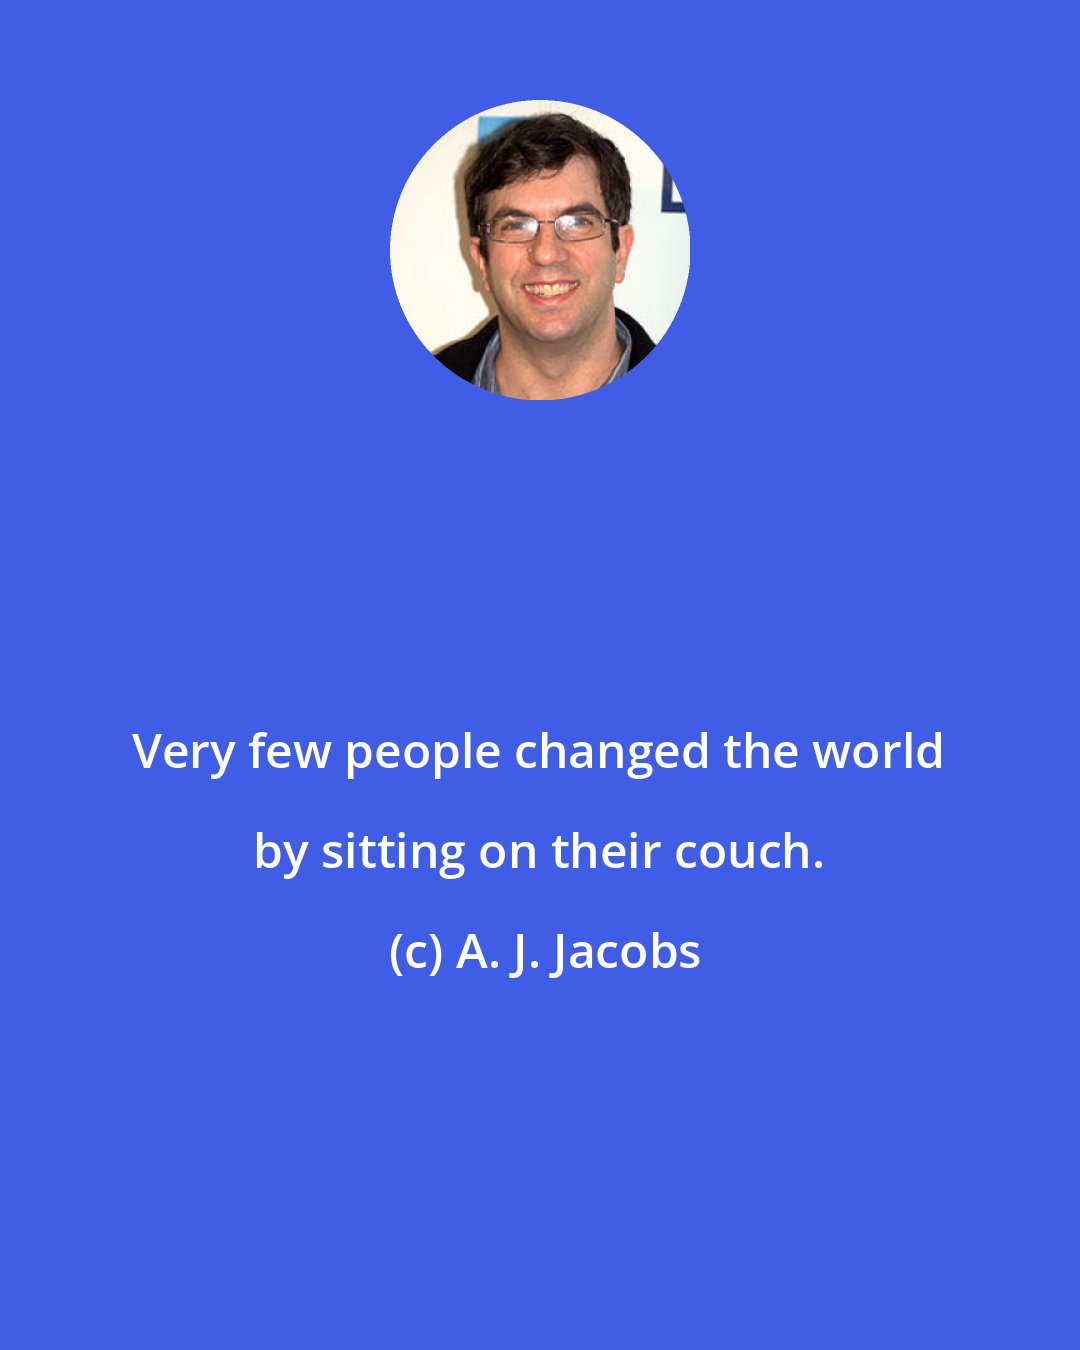 A. J. Jacobs: Very few people changed the world by sitting on their couch.